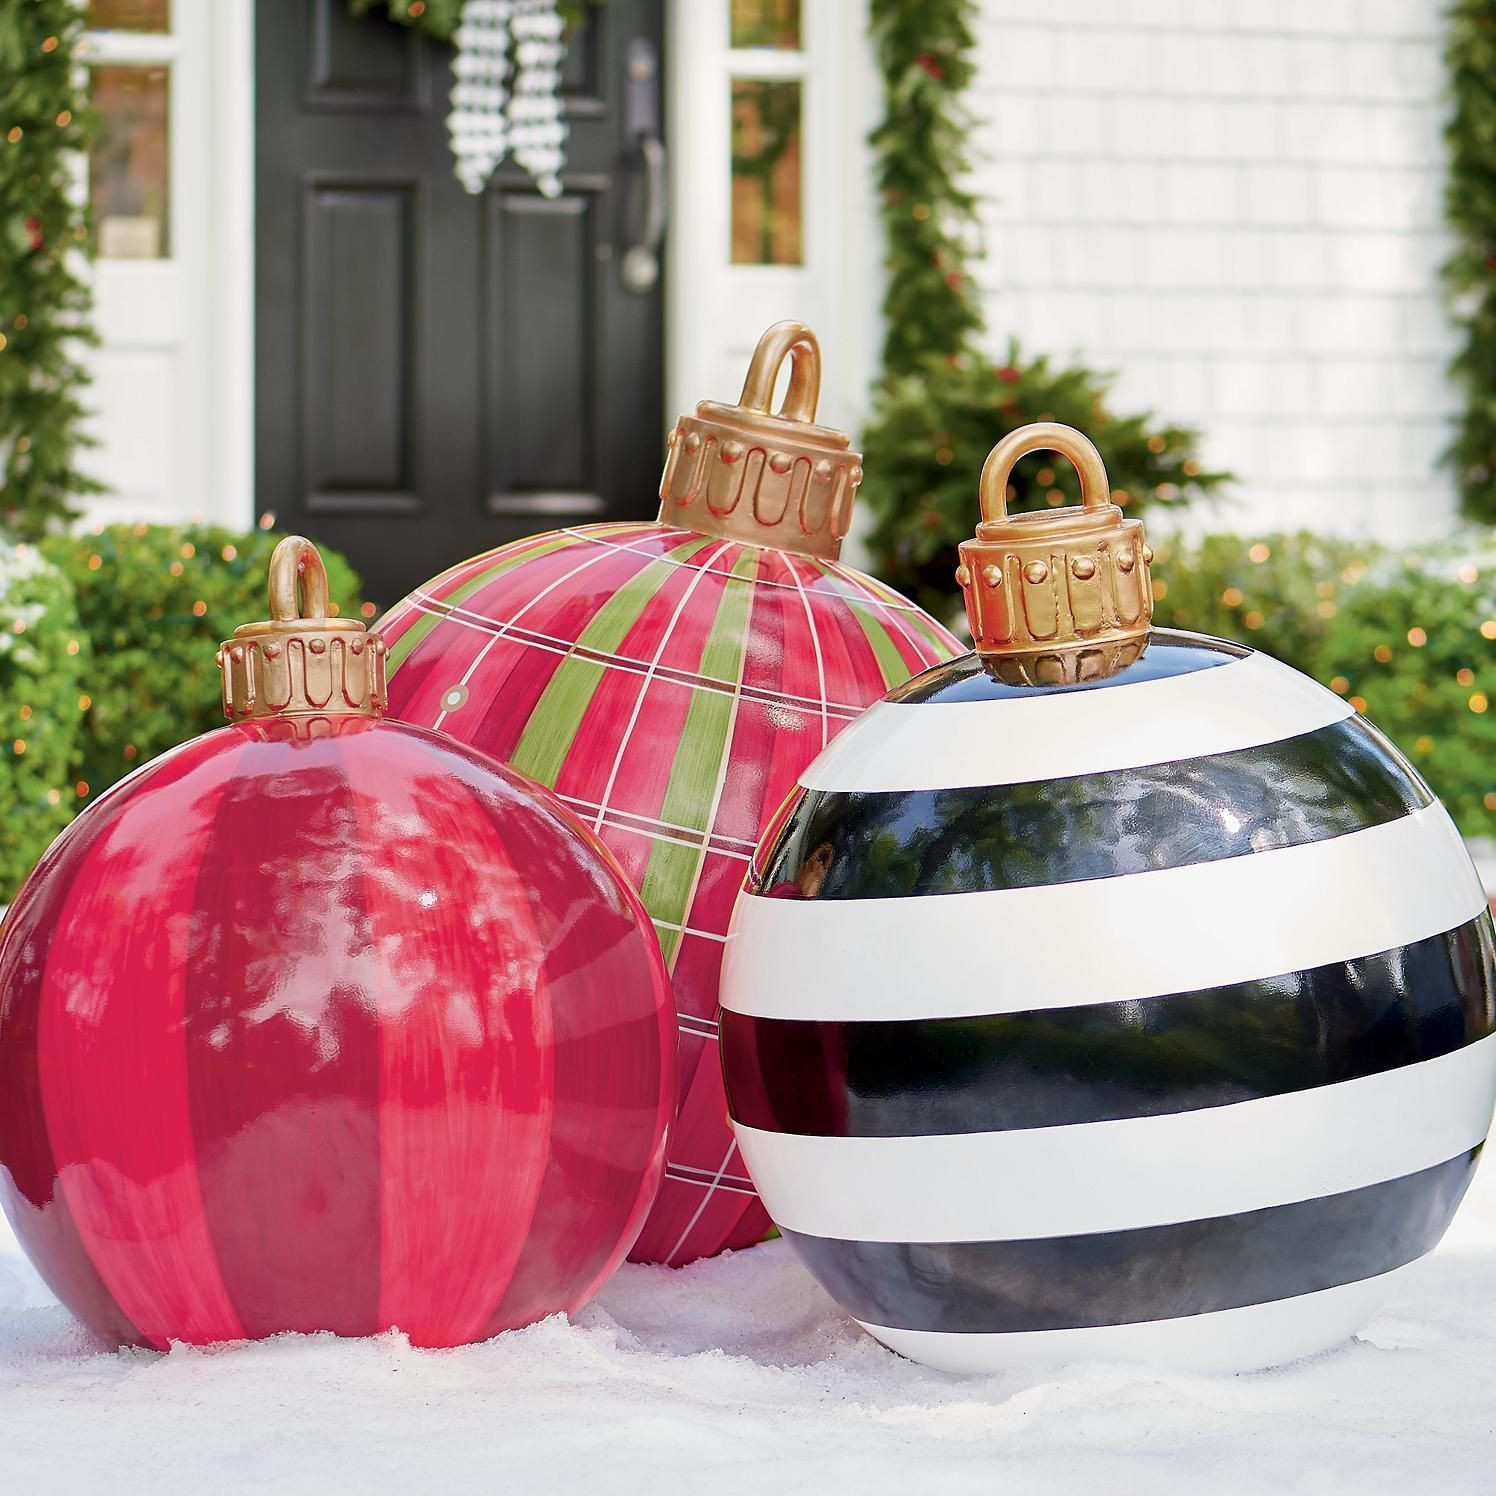 DIY Large Outdoor Christmas Decorations
 These Oversized Christmas Ornaments Are So Much Better